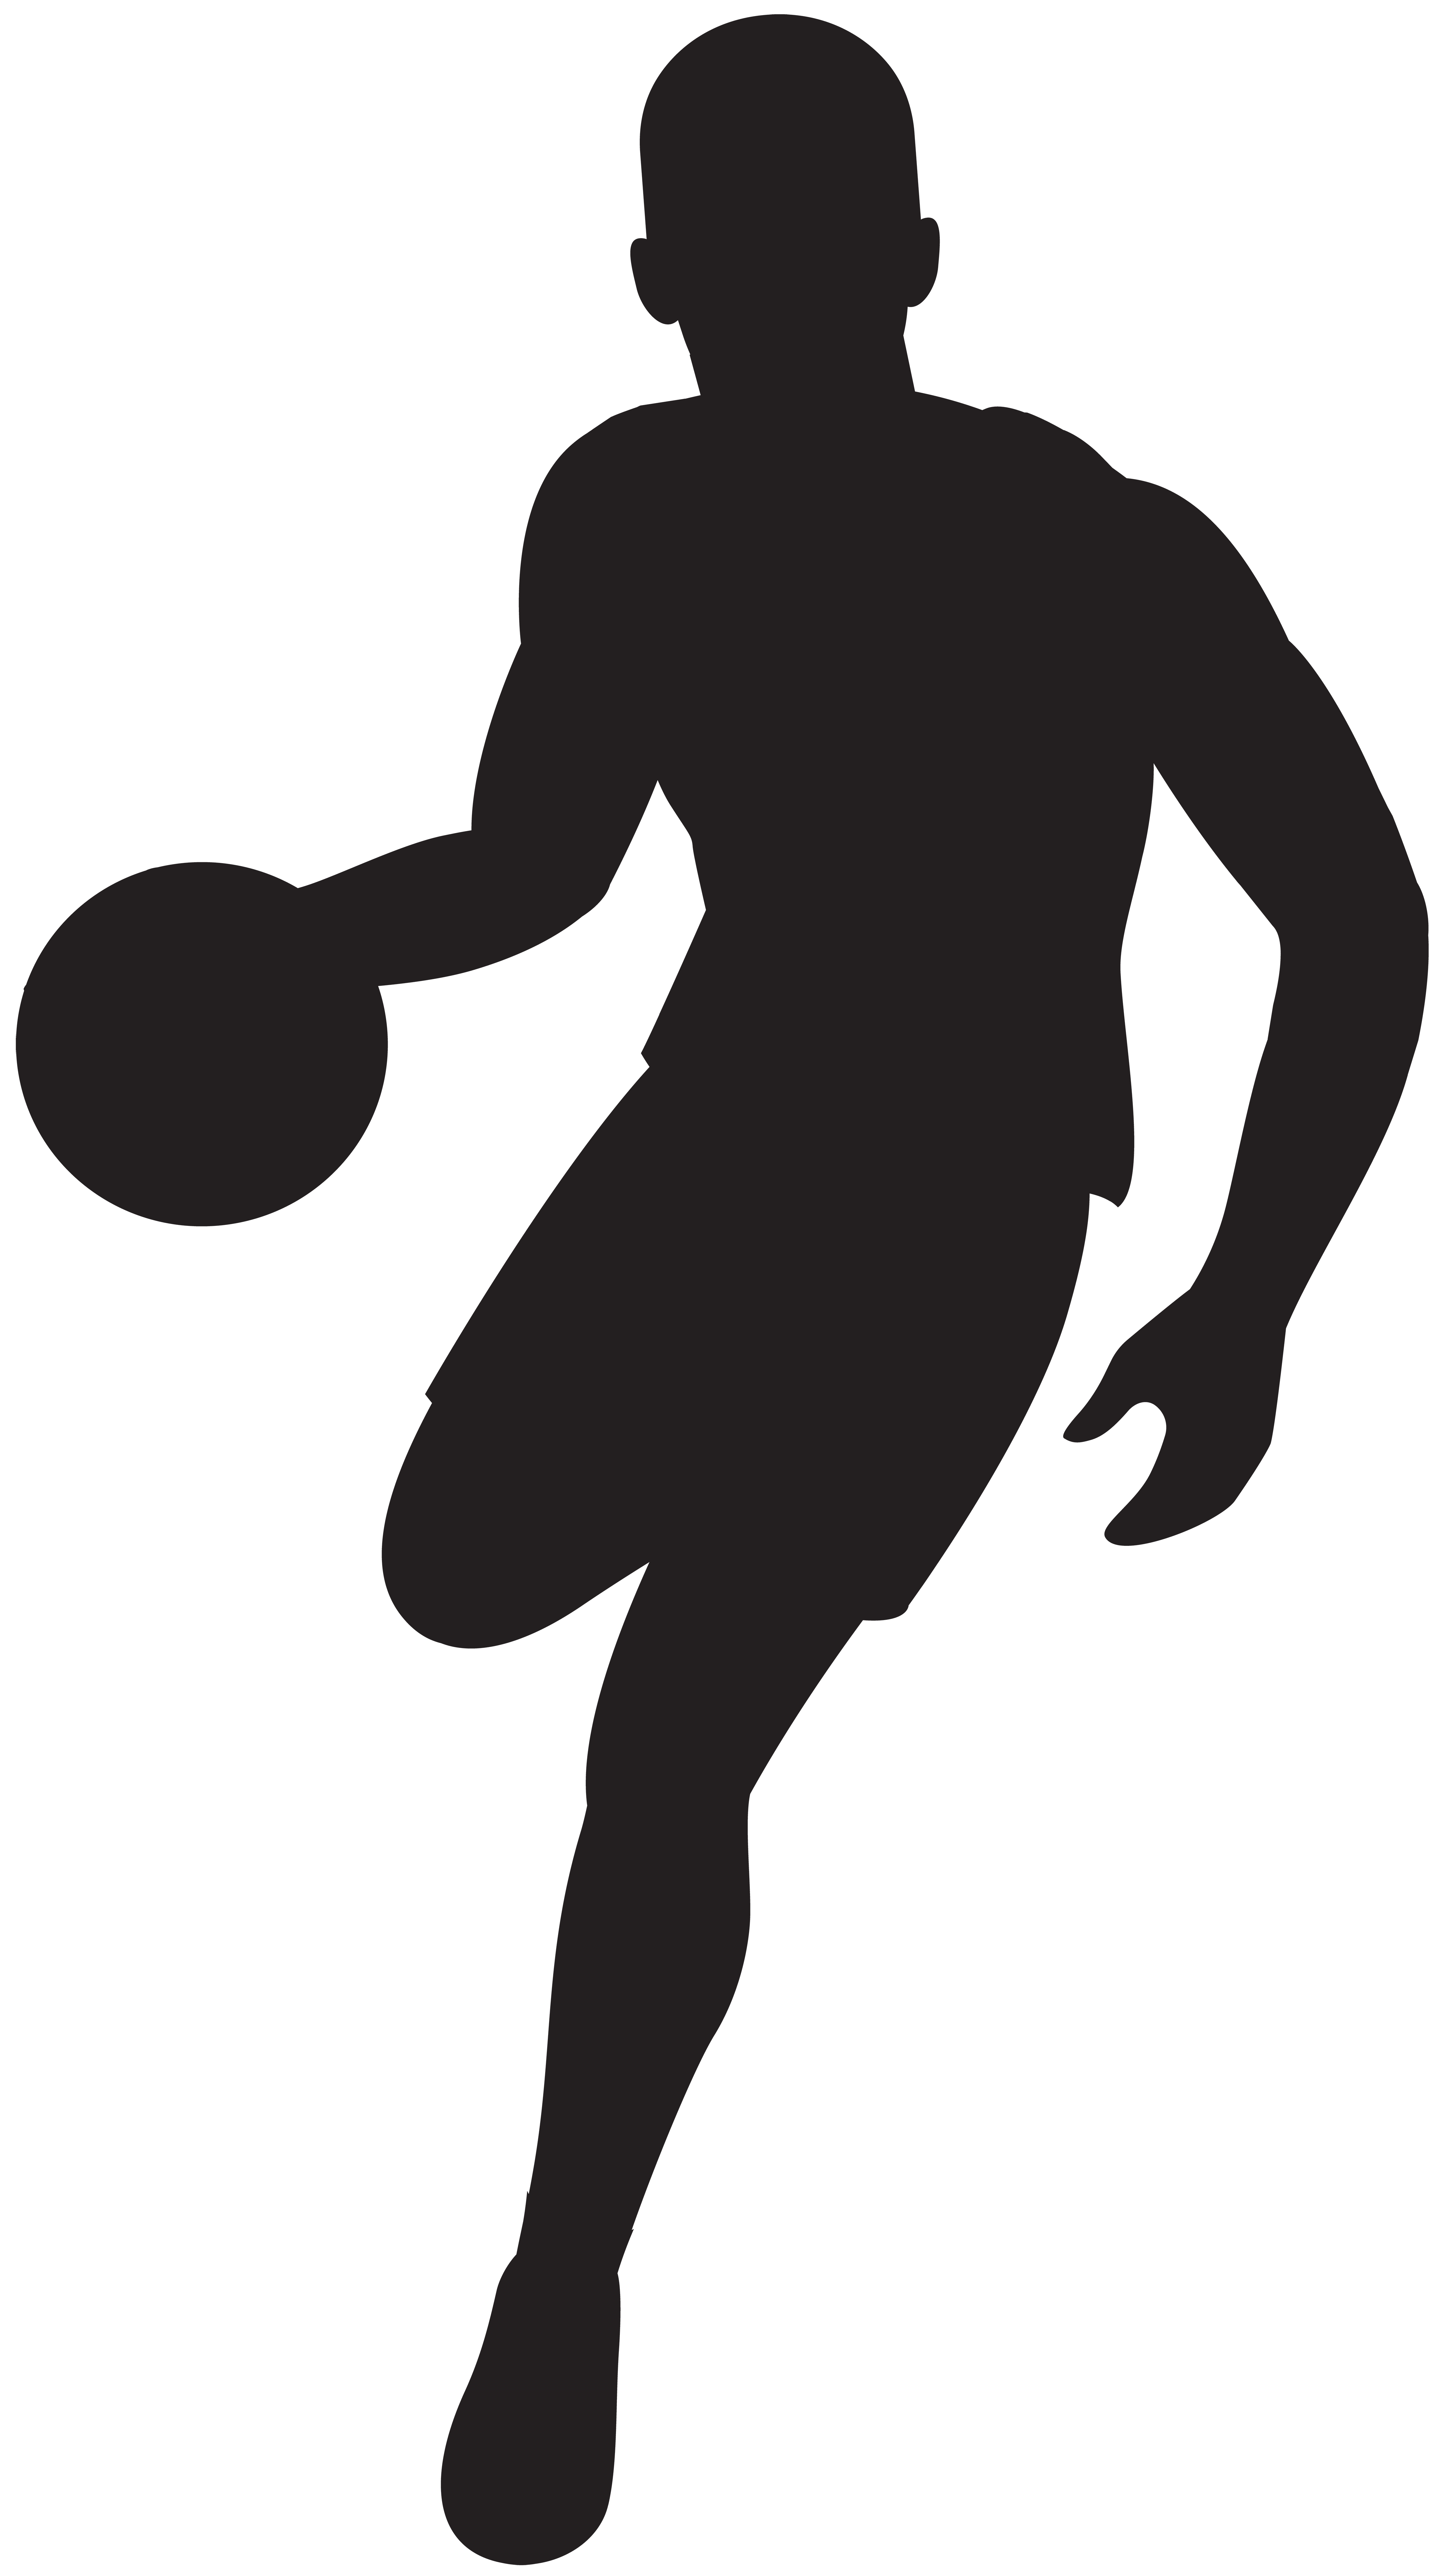 Basketball Player Silhouette Clip Art Image